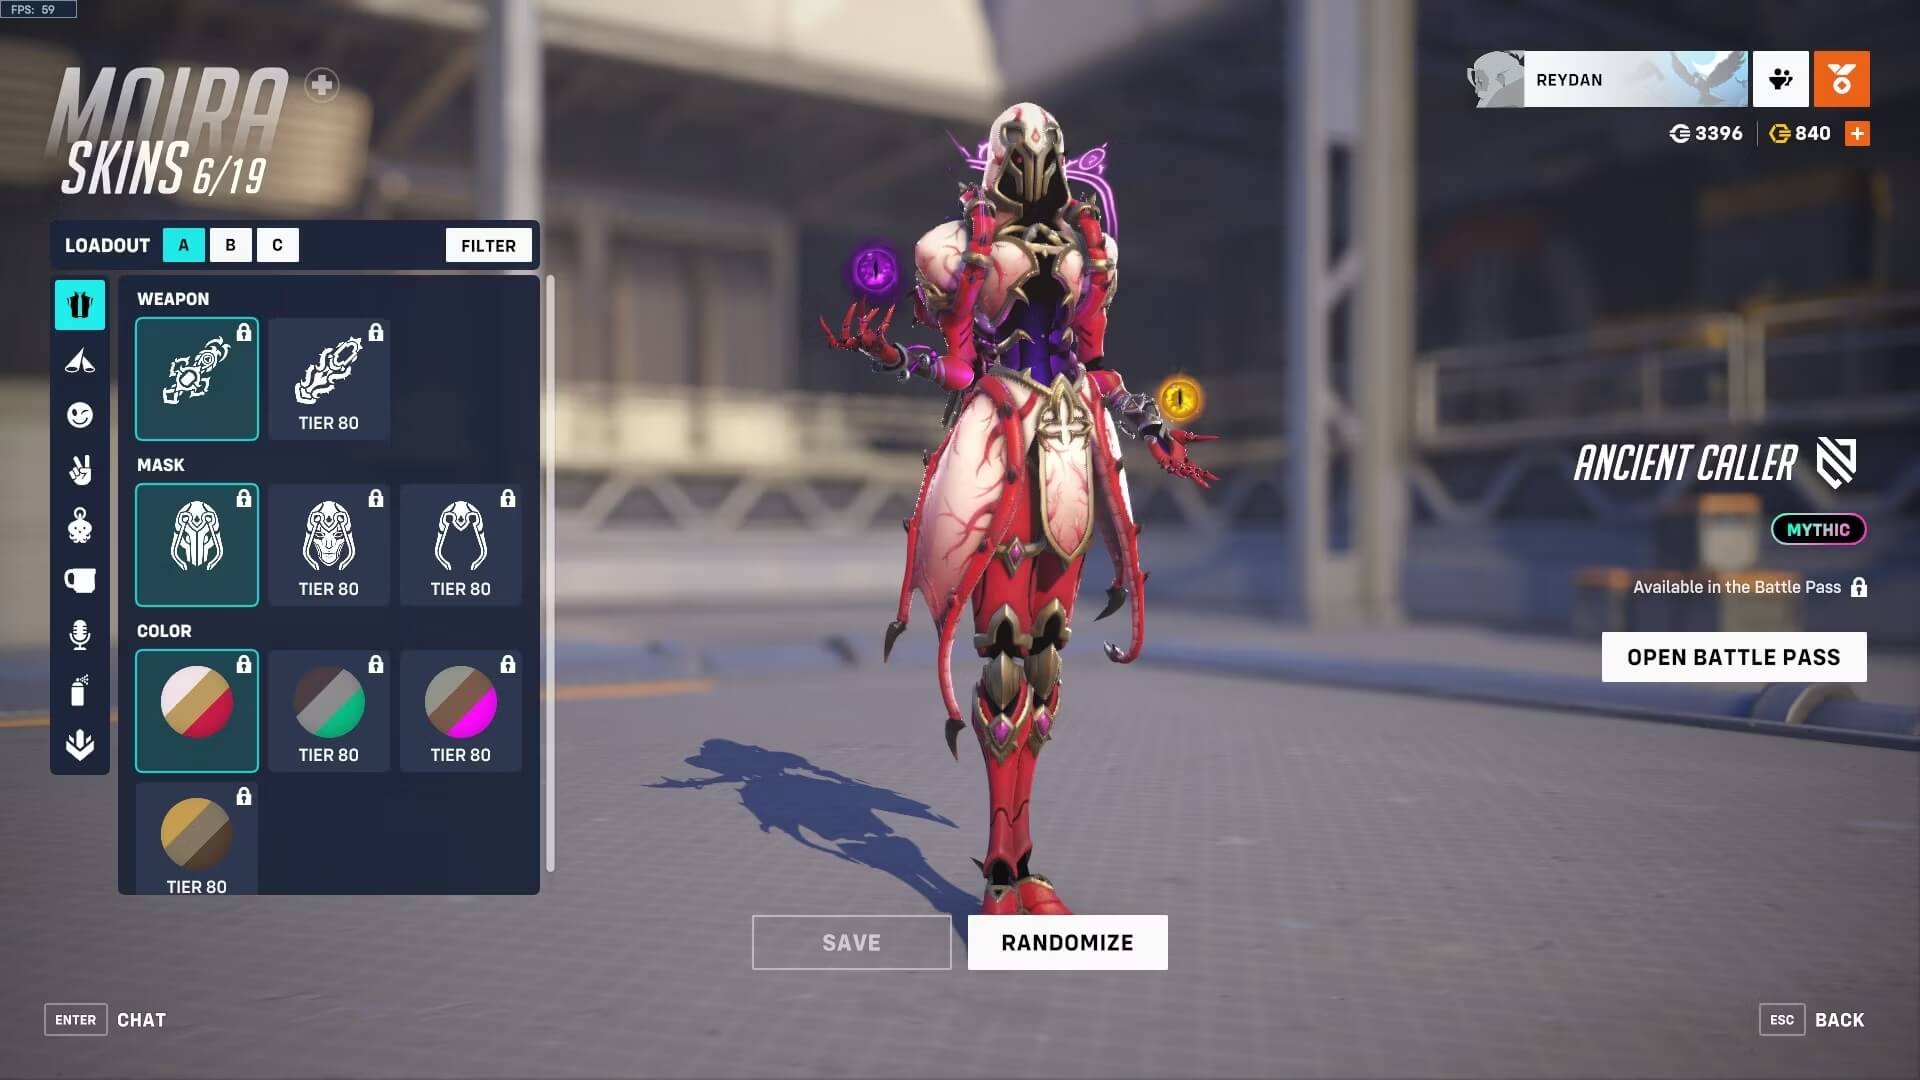 Overwatch 2 Delivers on mythic skin promise with Season 9's Ancient Caller Moira